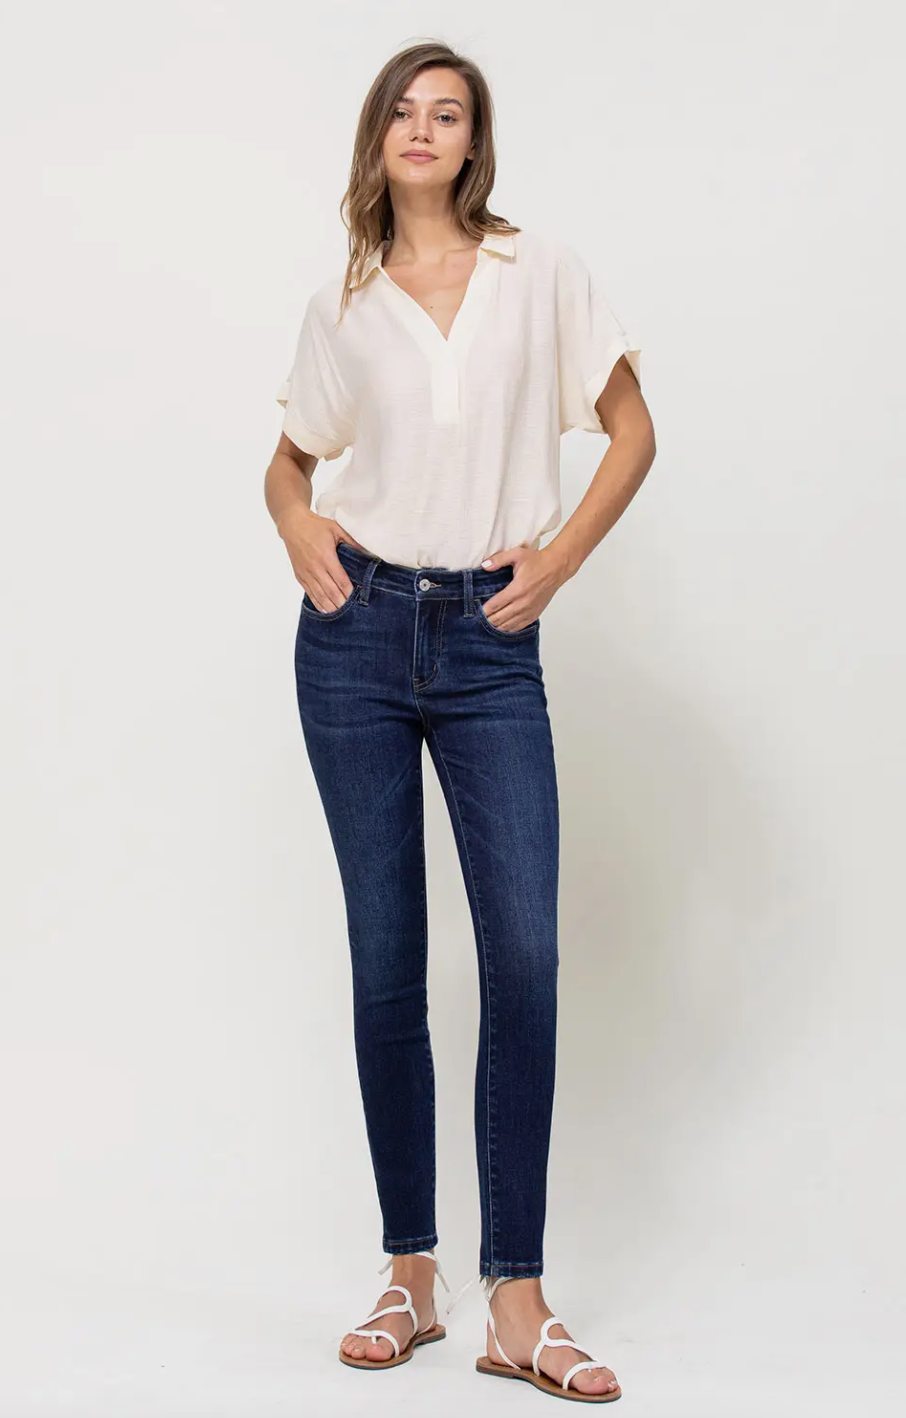 The Staple Skinny Jeans by Vervet - Dark Wash | The Afterglow Boutique ...